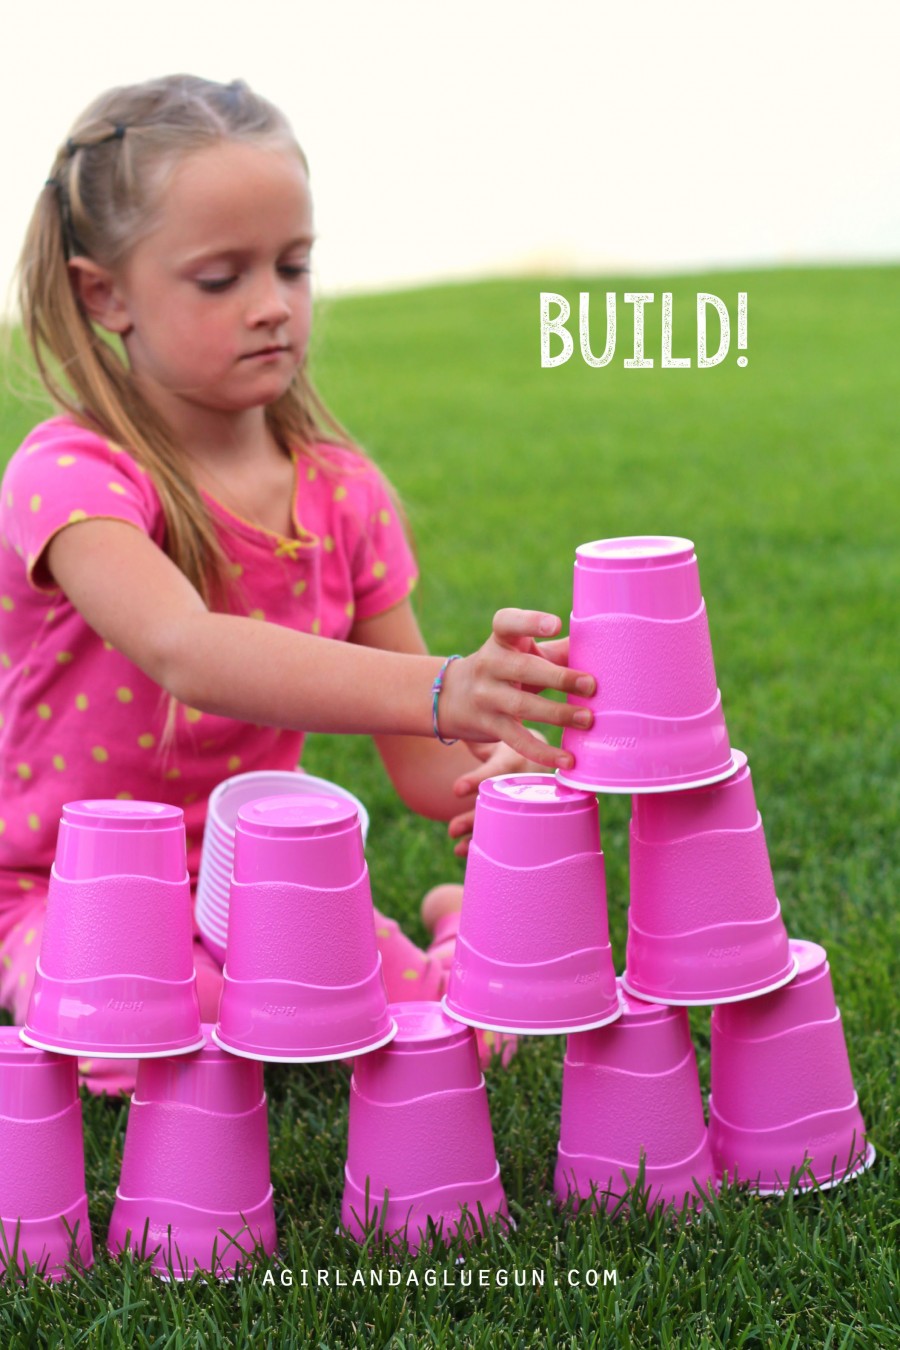 Fun Games You Can Play With Plastic Cups